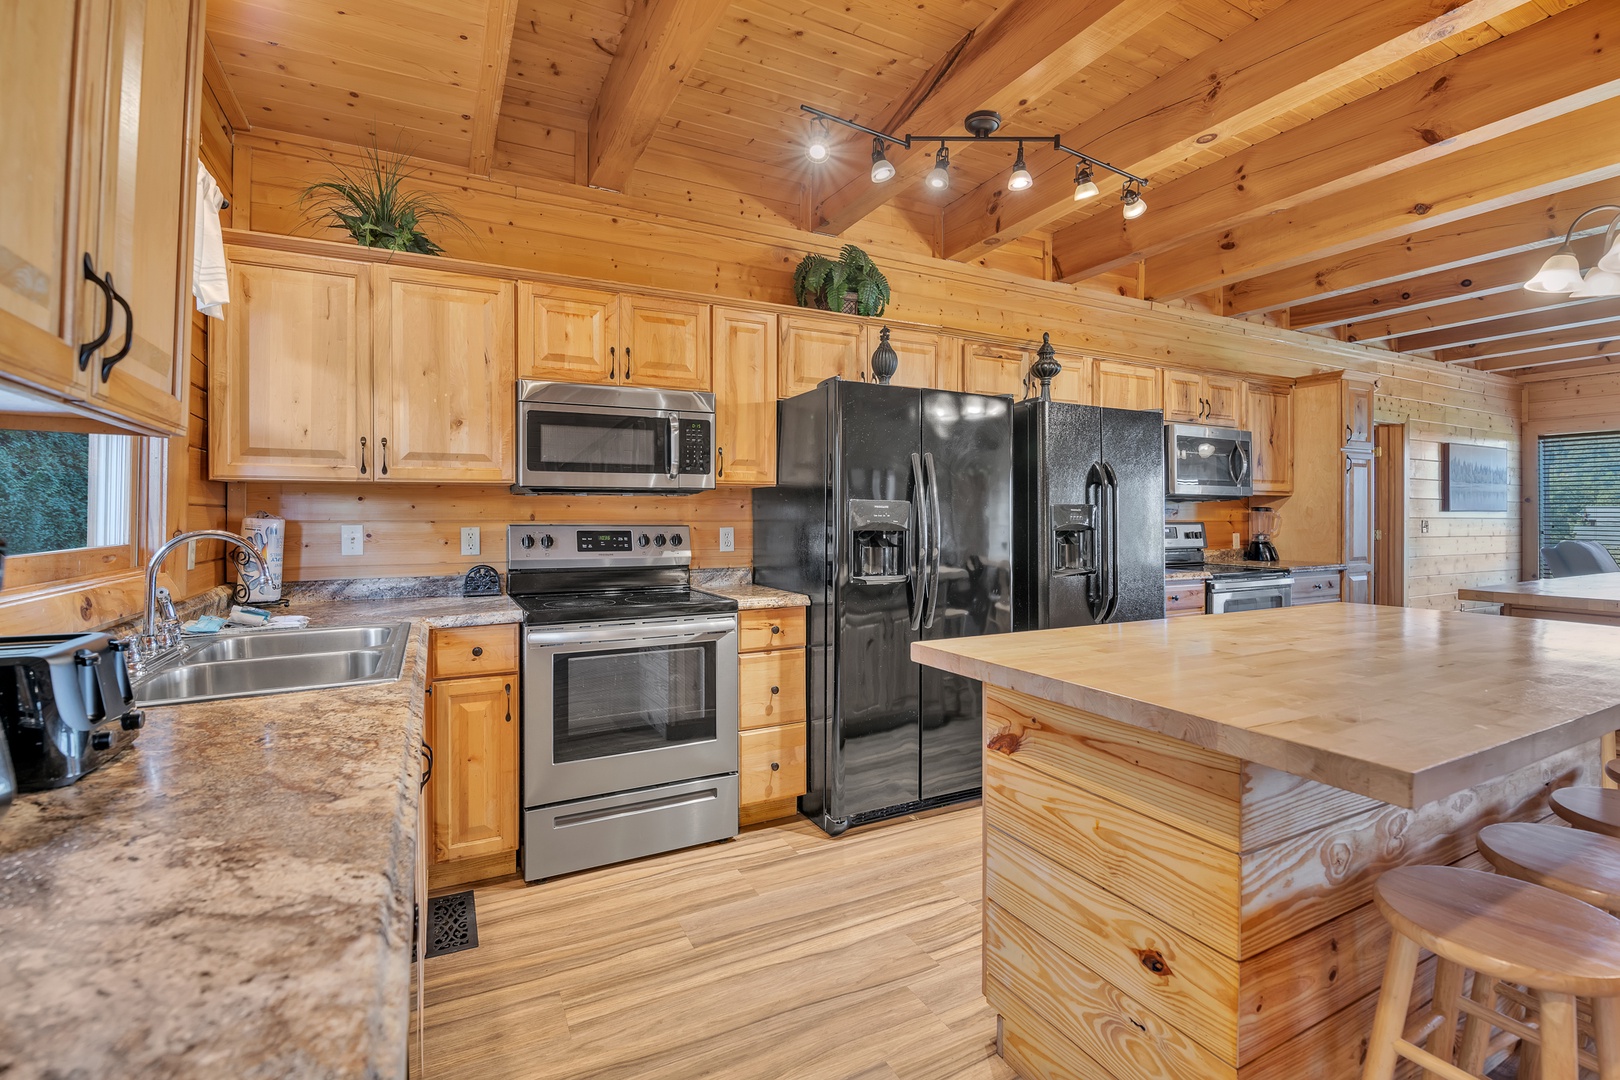 The gorgeous, rustic kitchen offers ample space & all the comforts of home